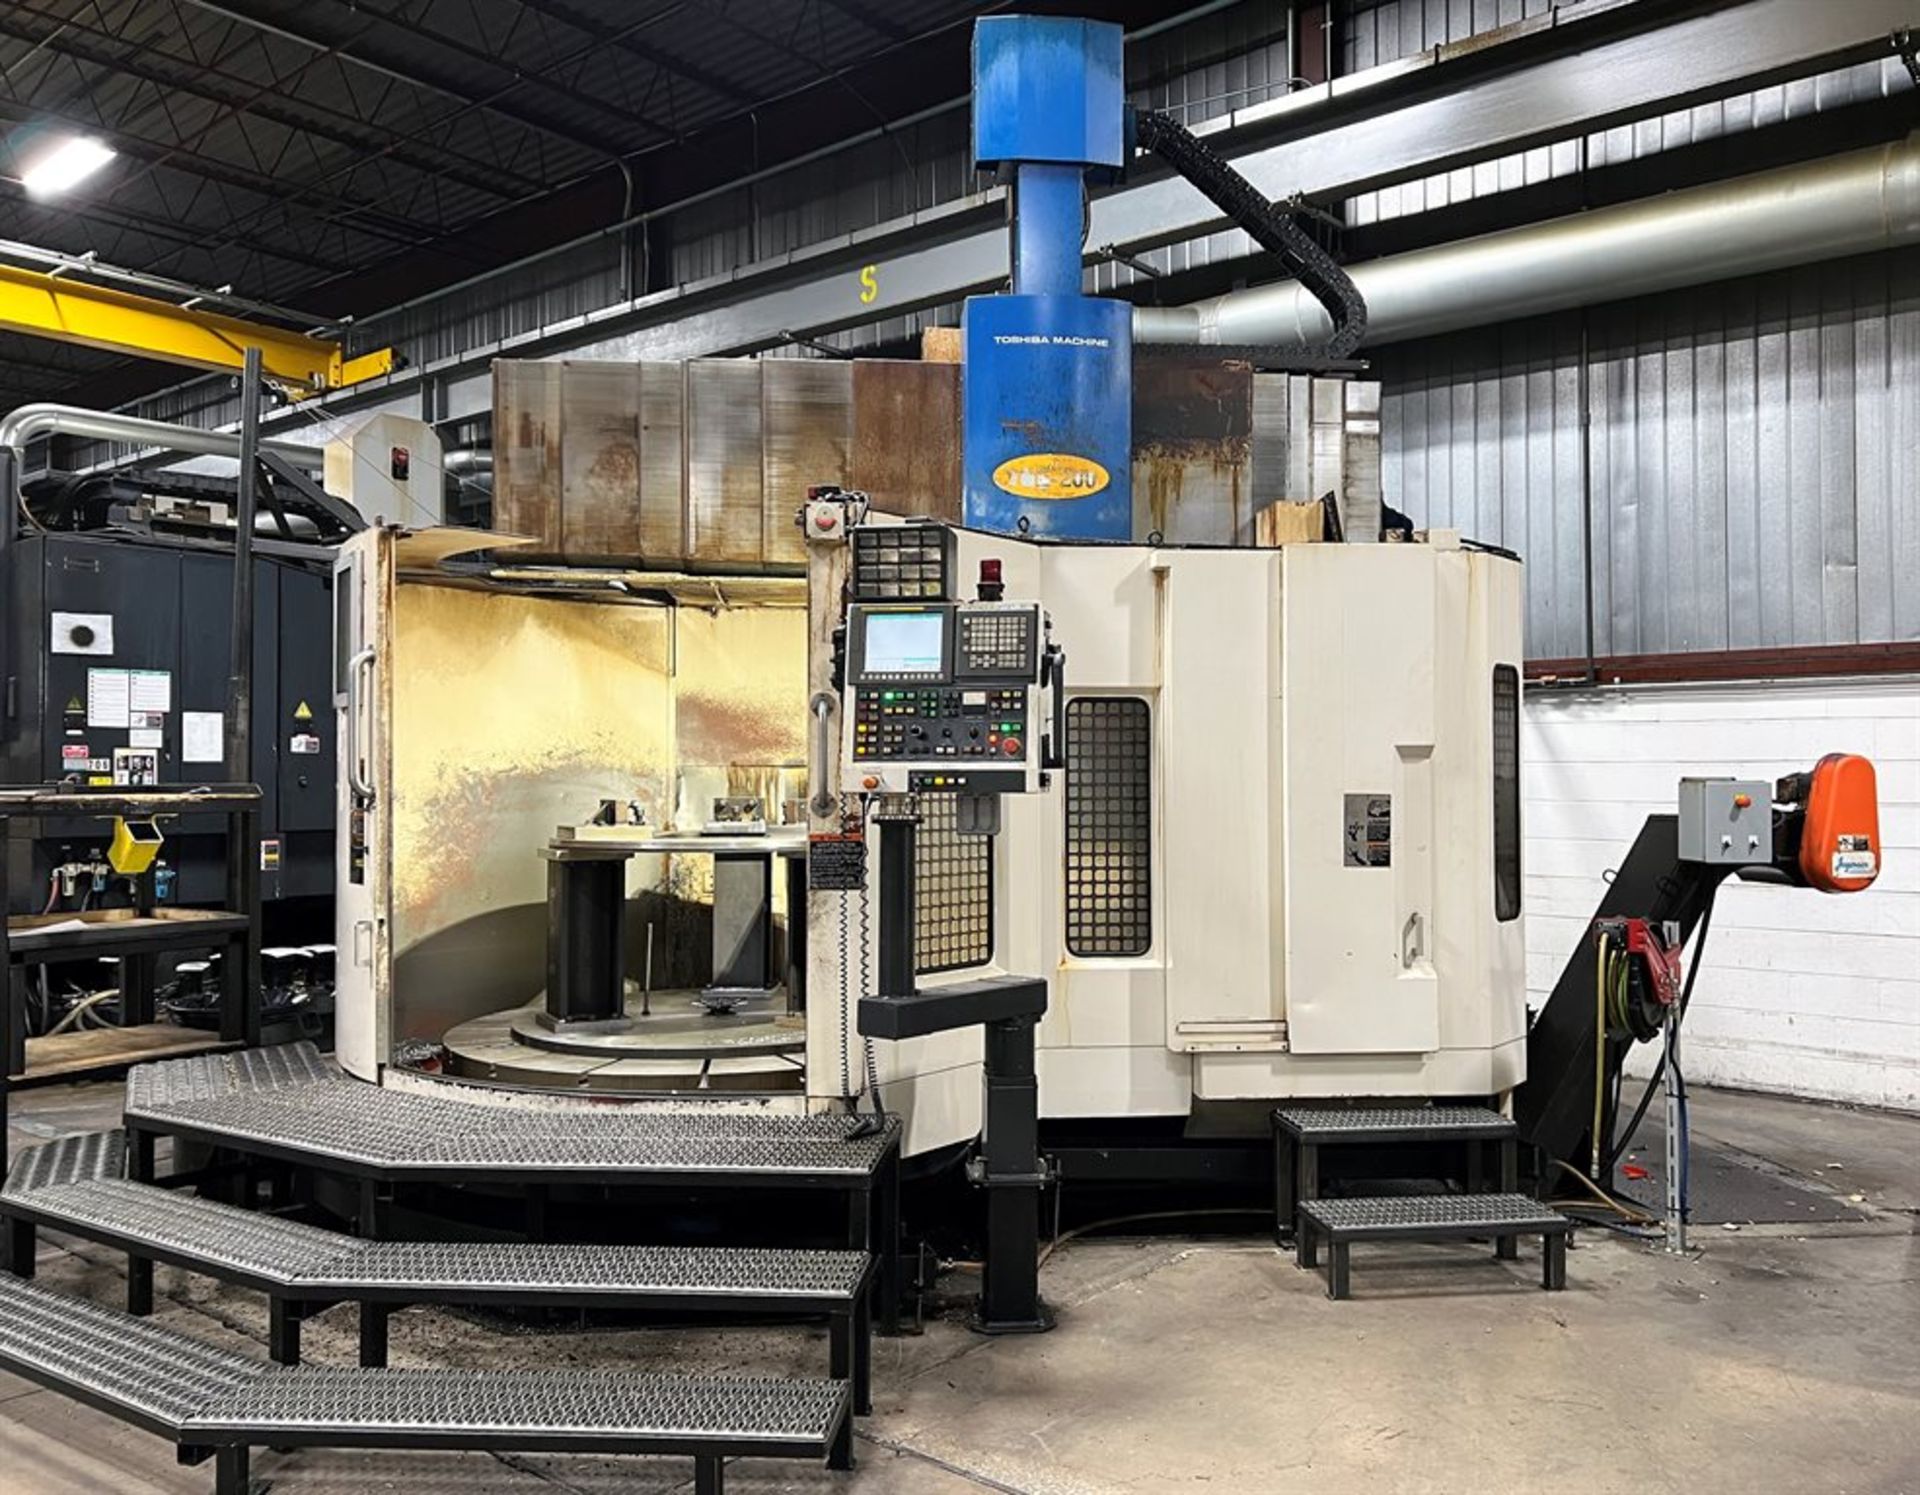 2011 TOSHIBA TUE-200 3-Axis CNC Vertical Turning Center, s/n 440548, Fanuc Series 0i-TD Controls,